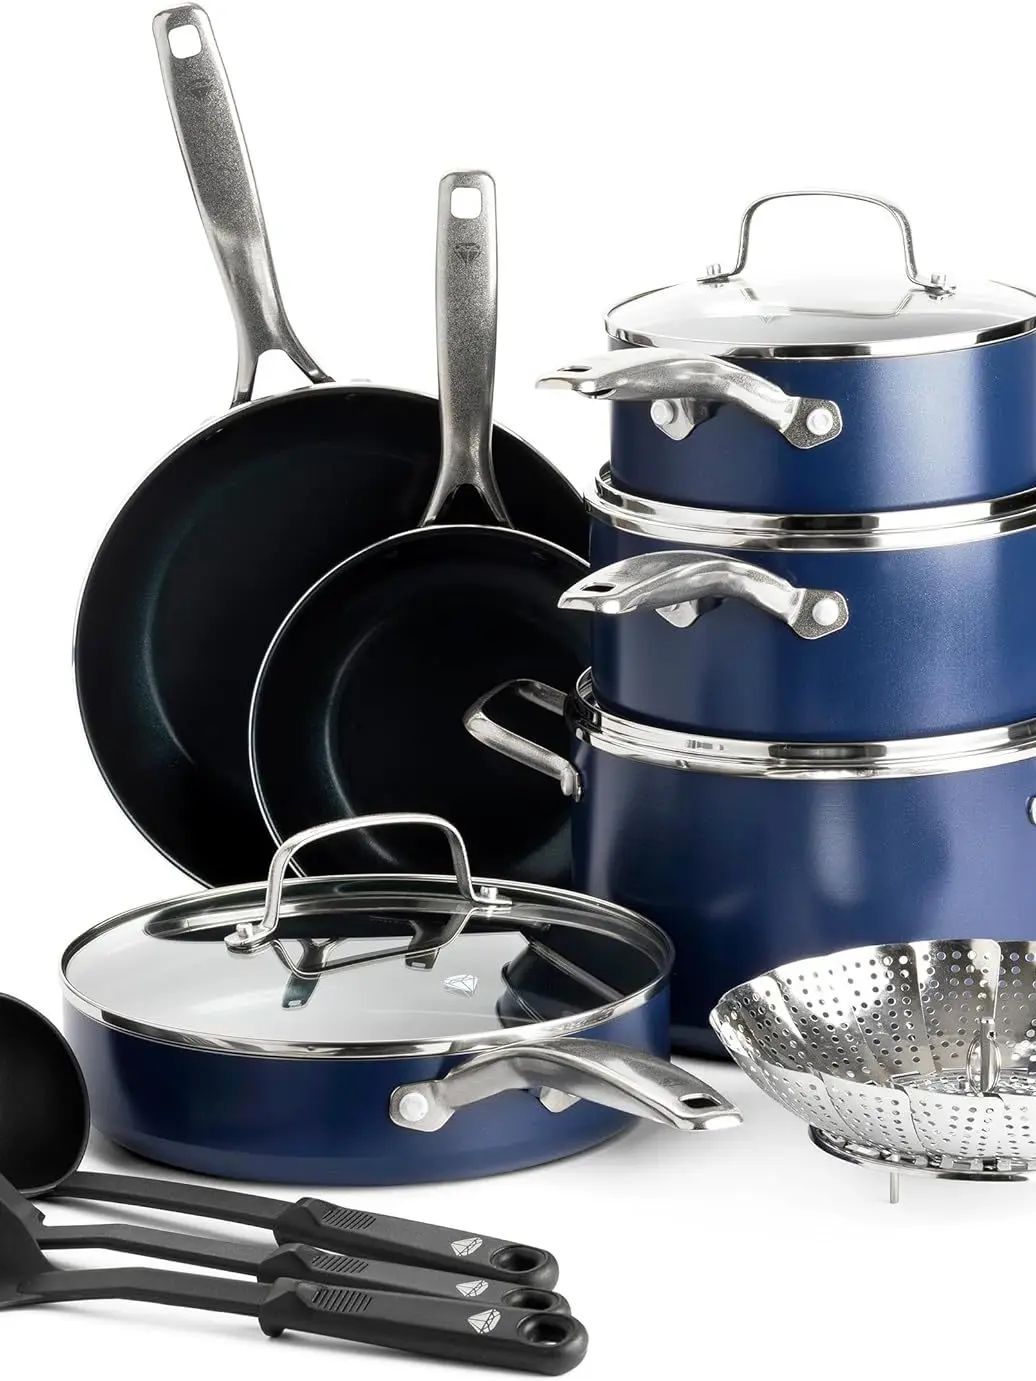 

Blue Diamond Cookware Diamond Infused Ceramic Nonstick, 10 Piece Cookware Pots and Pans Set, PFAS Free, Dishwasher Safe, Oven